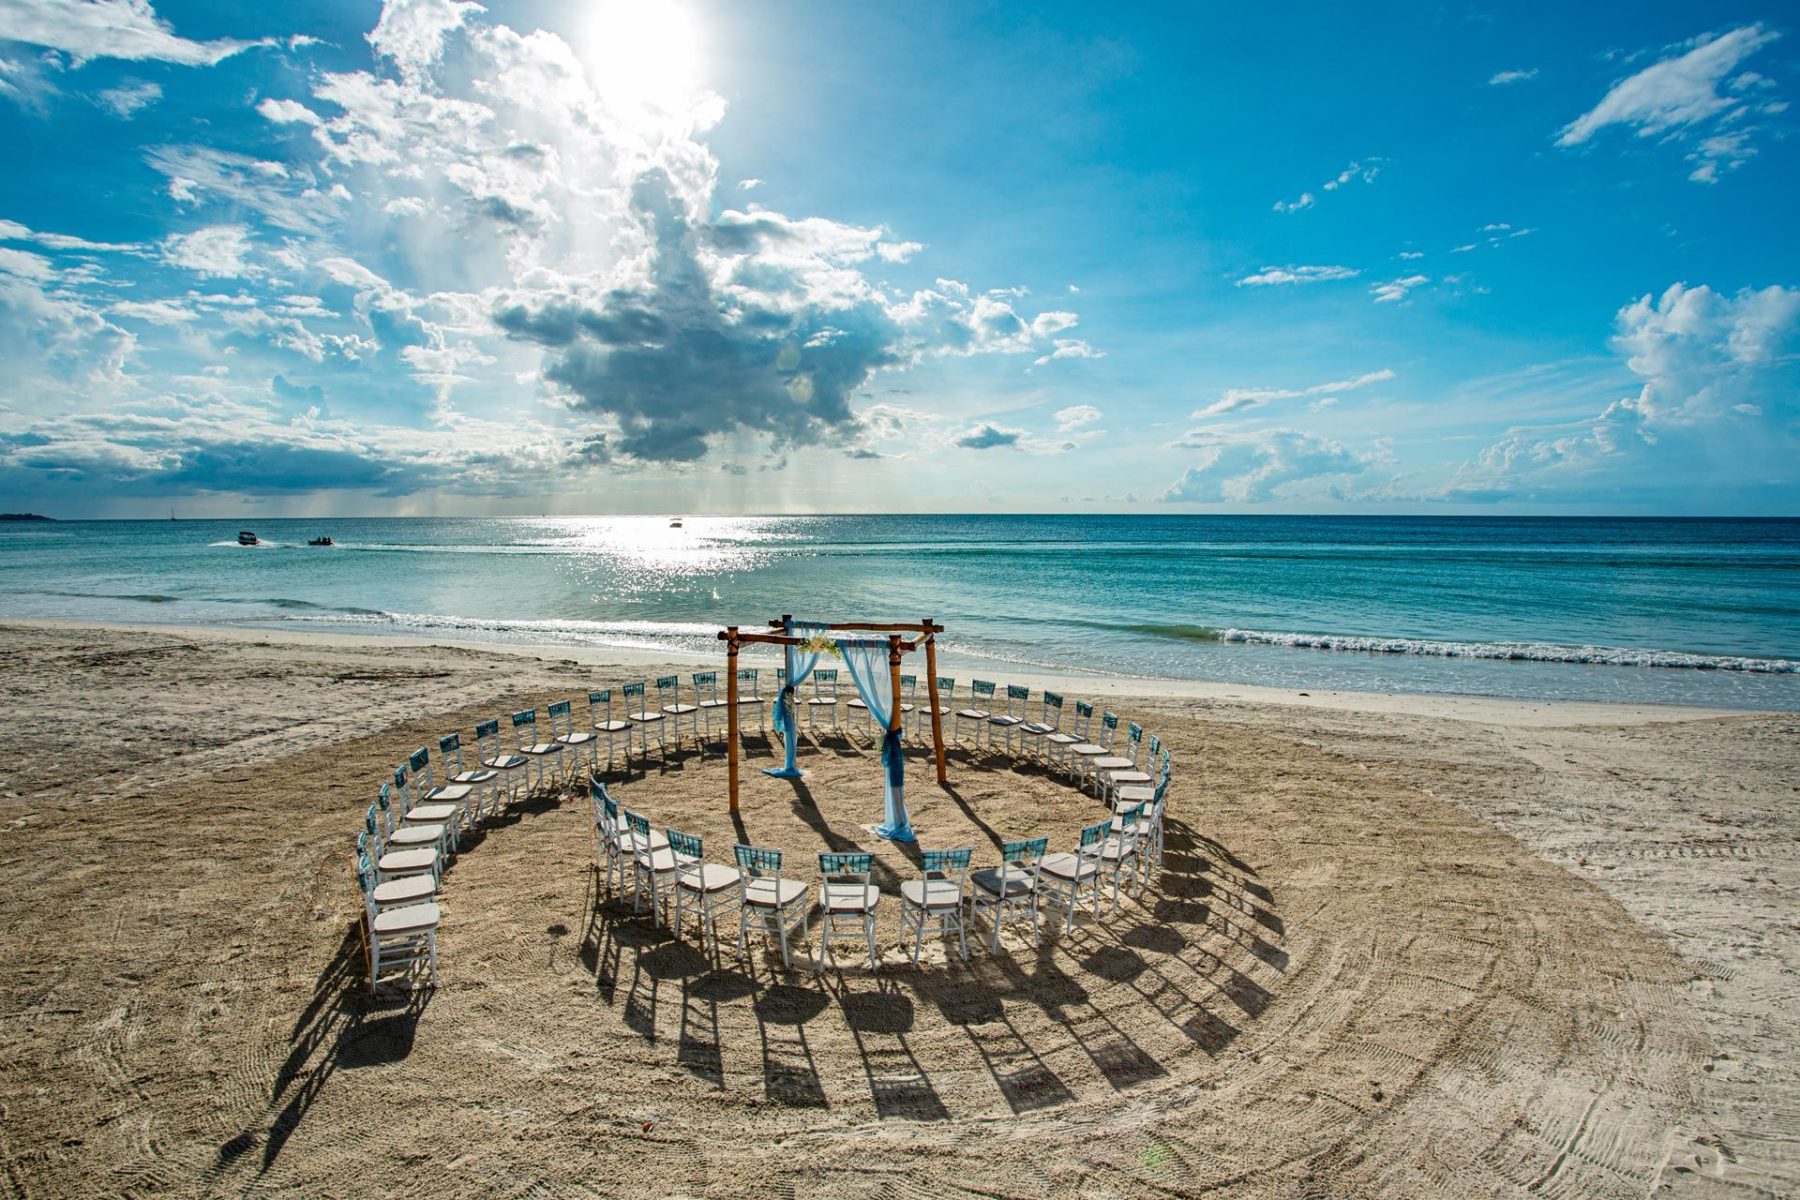 Sandals and Beaches Vacations